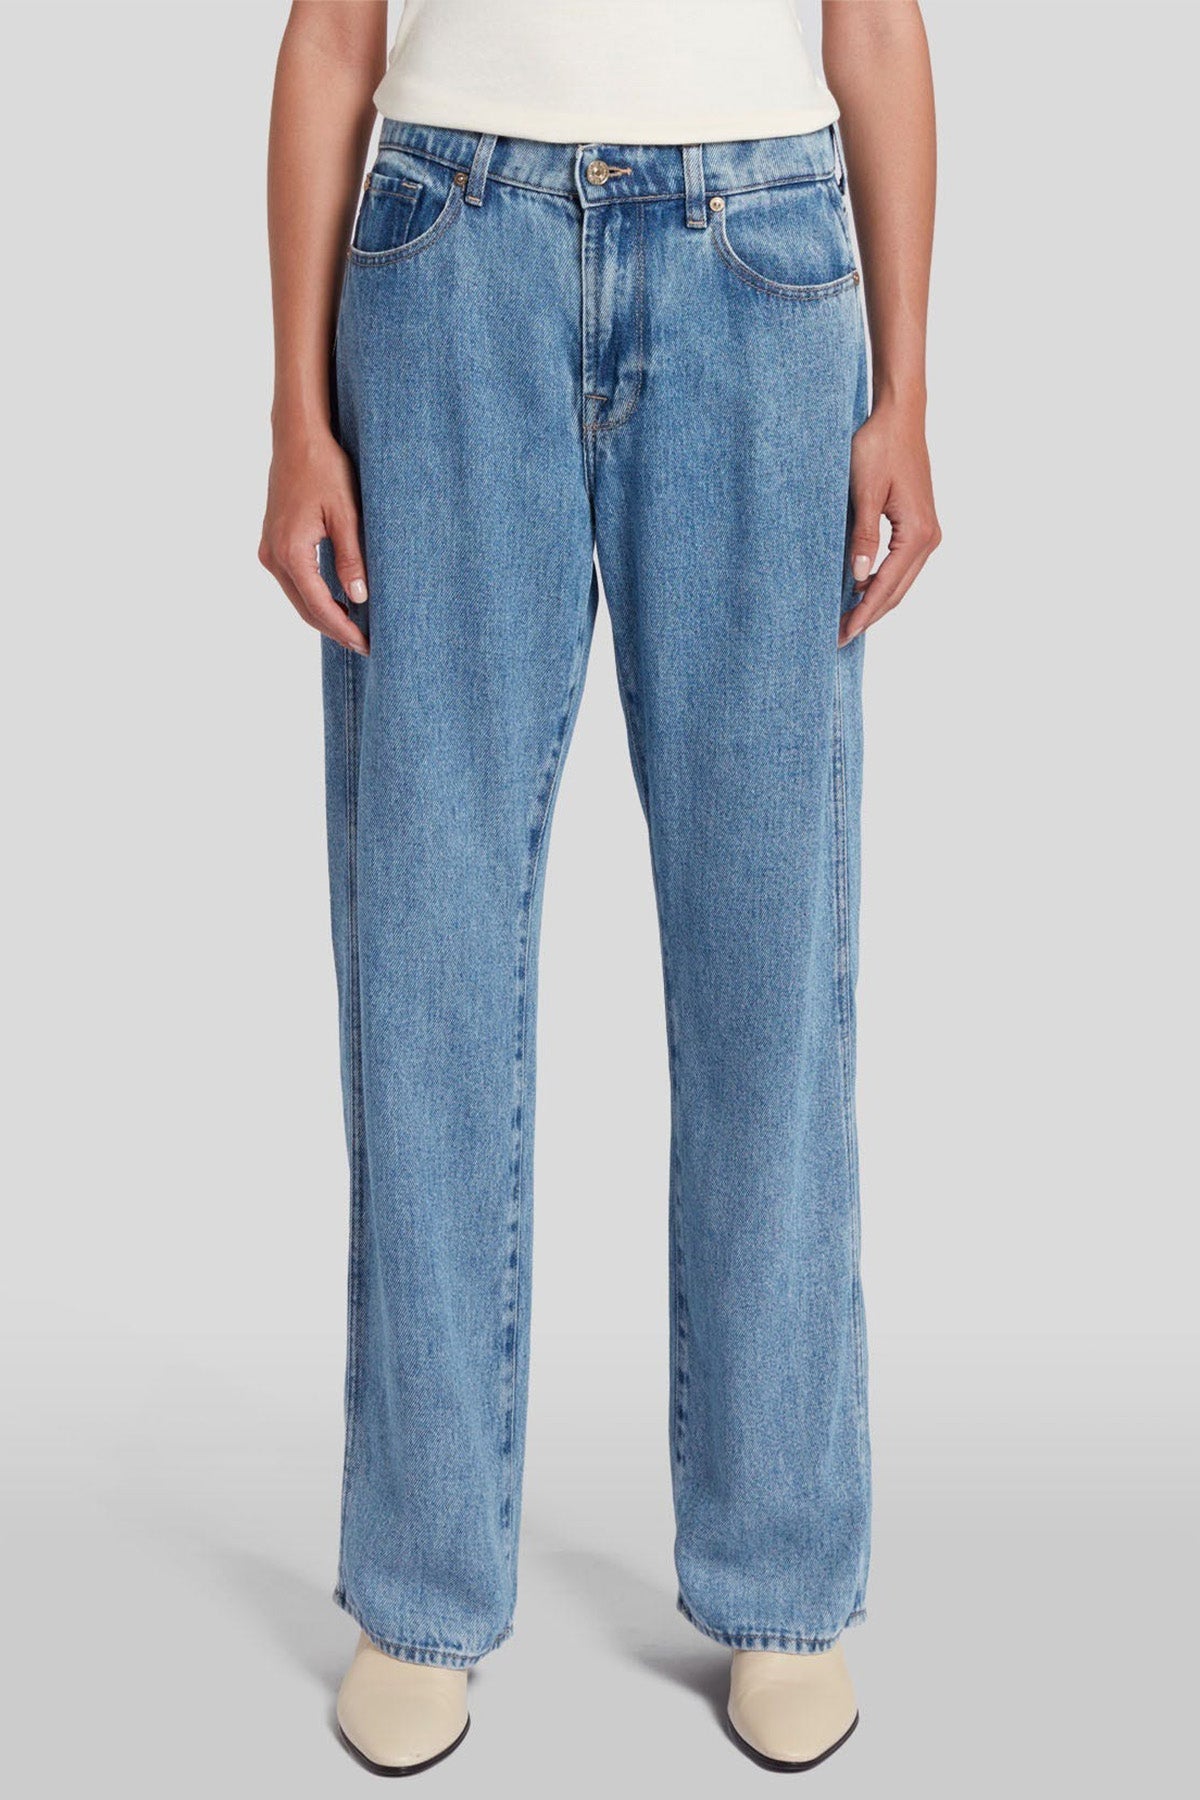 7 For All Mankind Valentine Tess Trouser Straight Fit Jeans